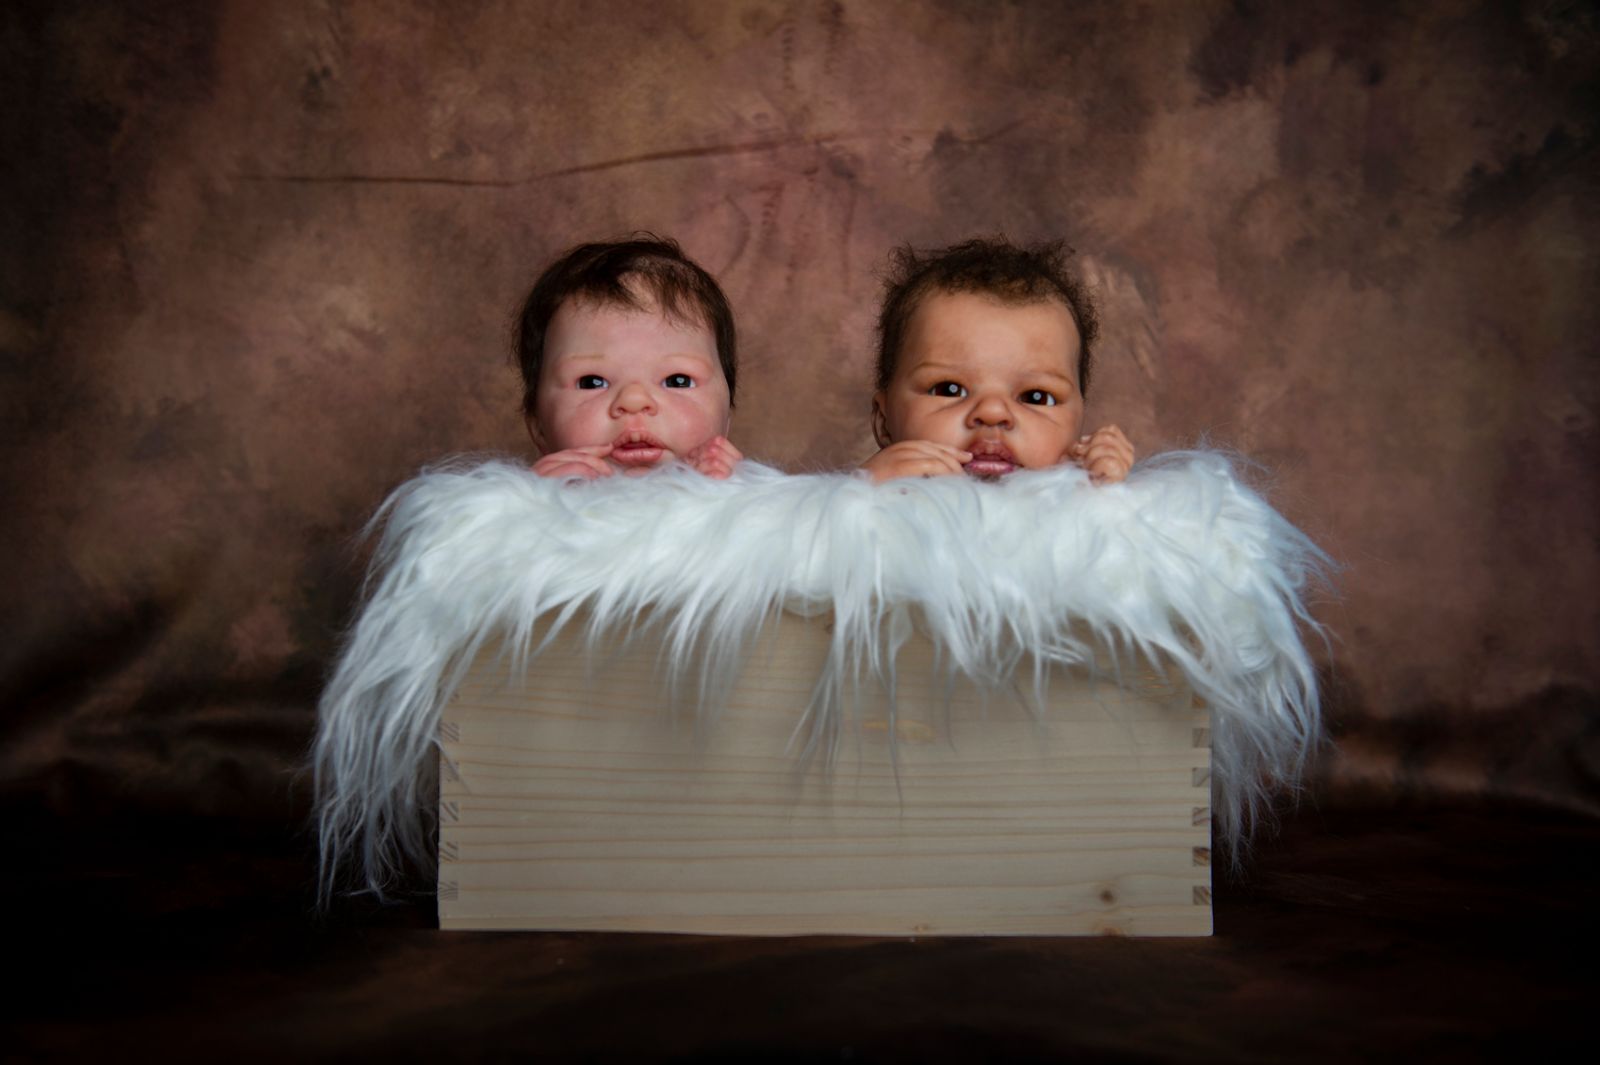 © Emanuela Colombo - Image from the My Special Baby photography project